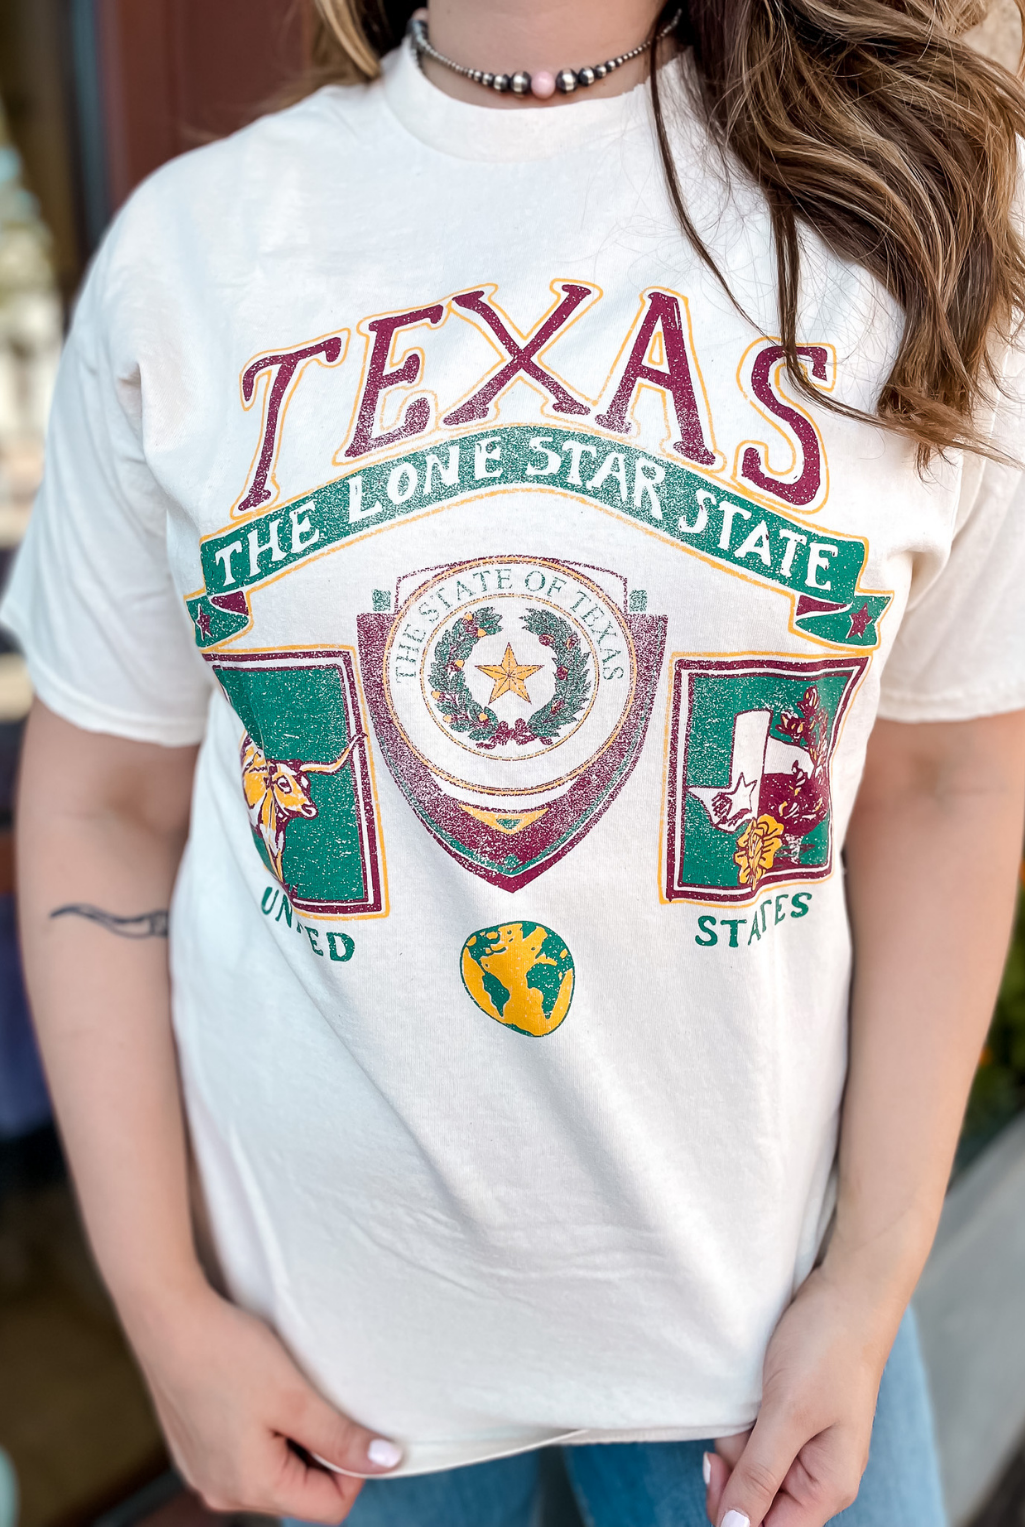 The State Of Texas T-Shirt